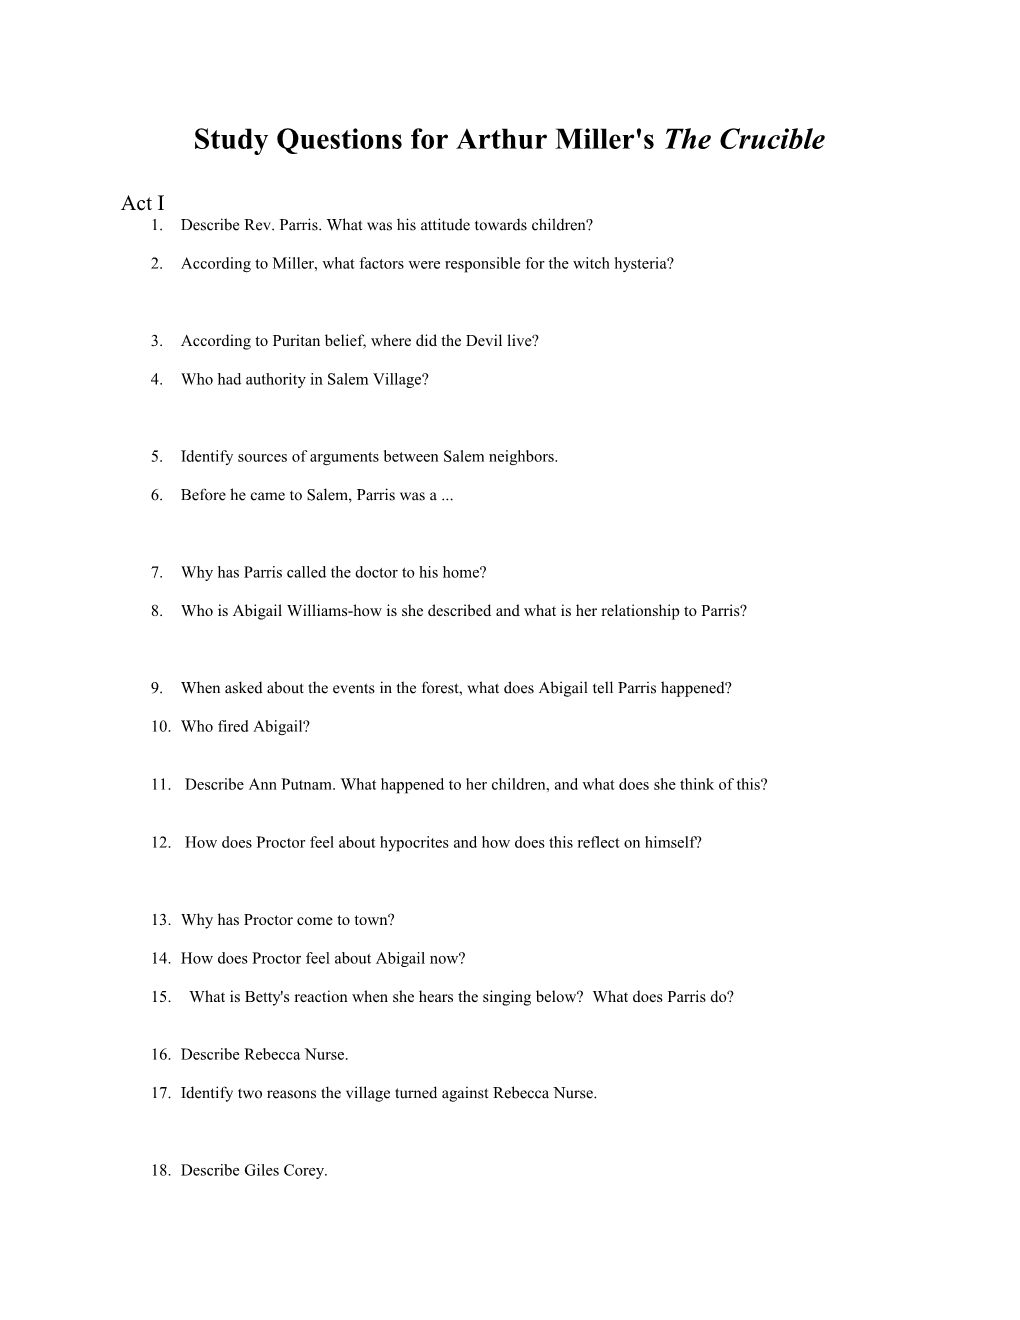 Study Questions for Arthur Miller's the Crucible